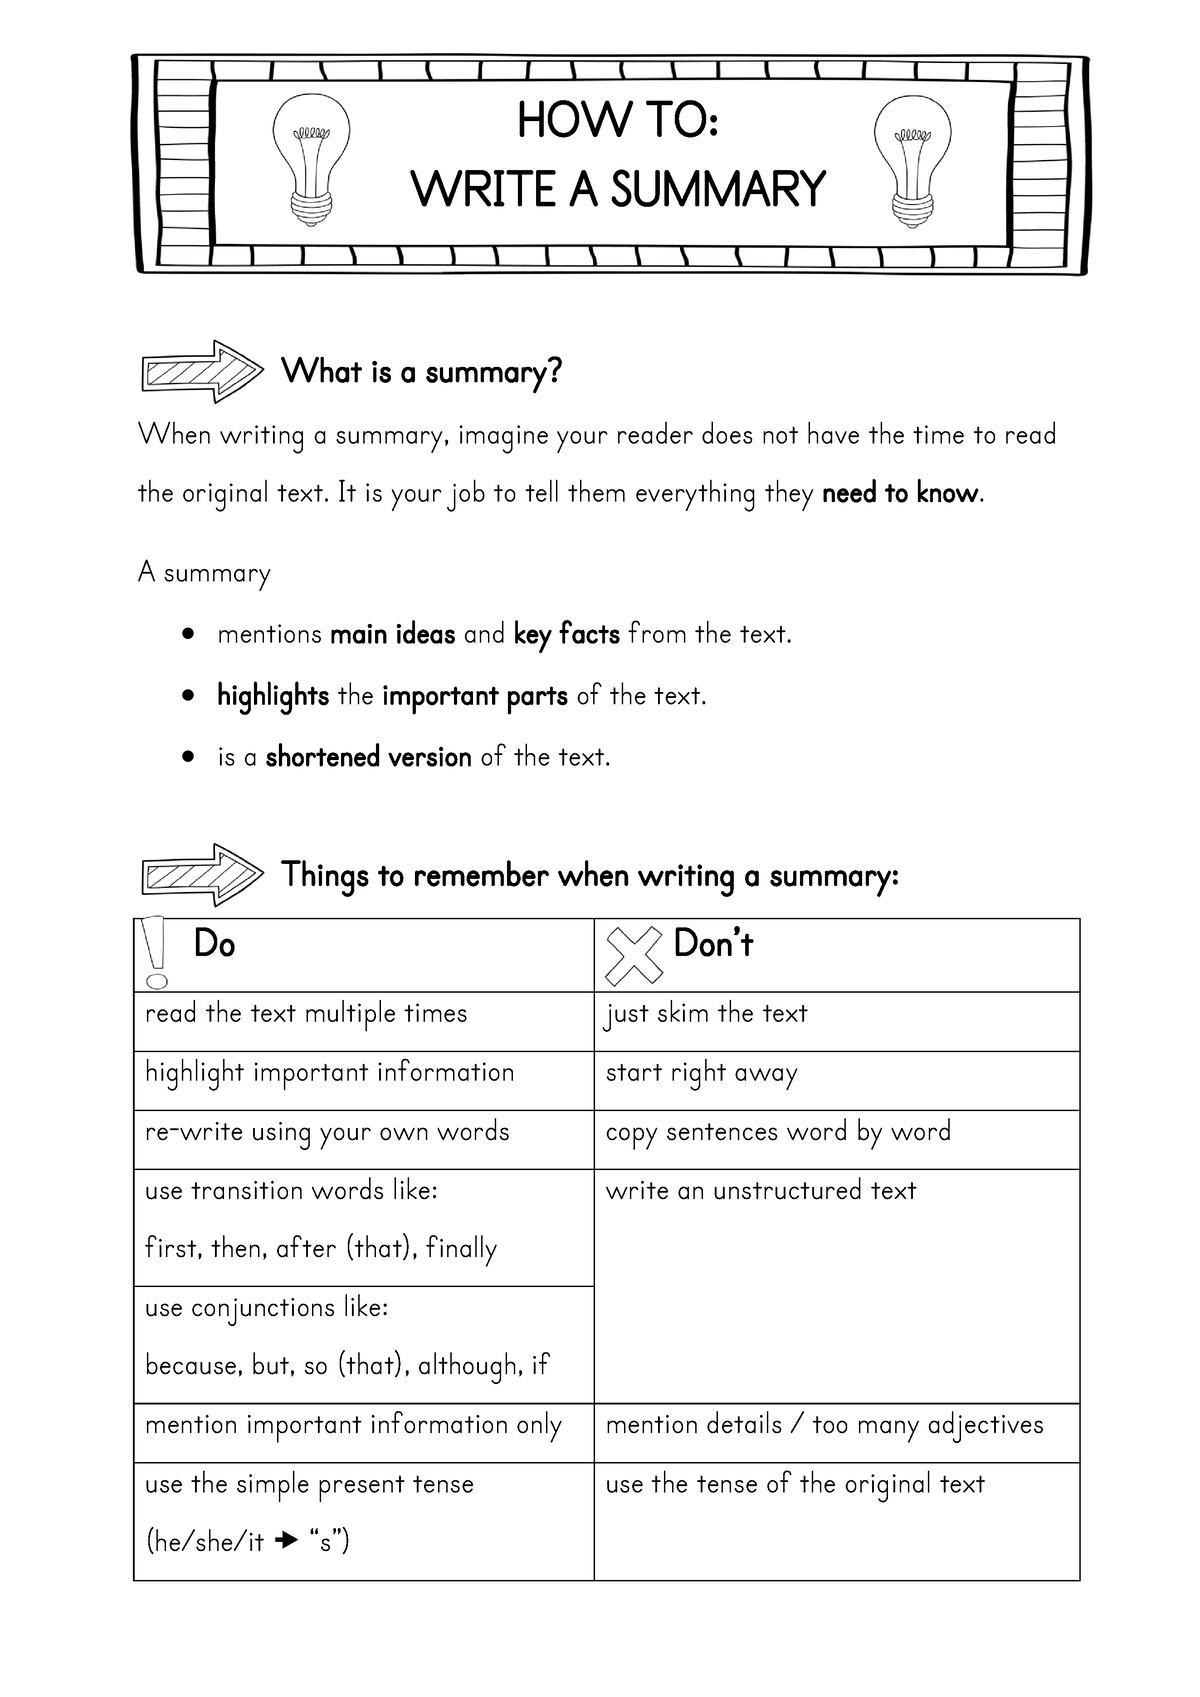 how-to-write-a-summary-page-1-how-to-write-a-summary-what-is-a